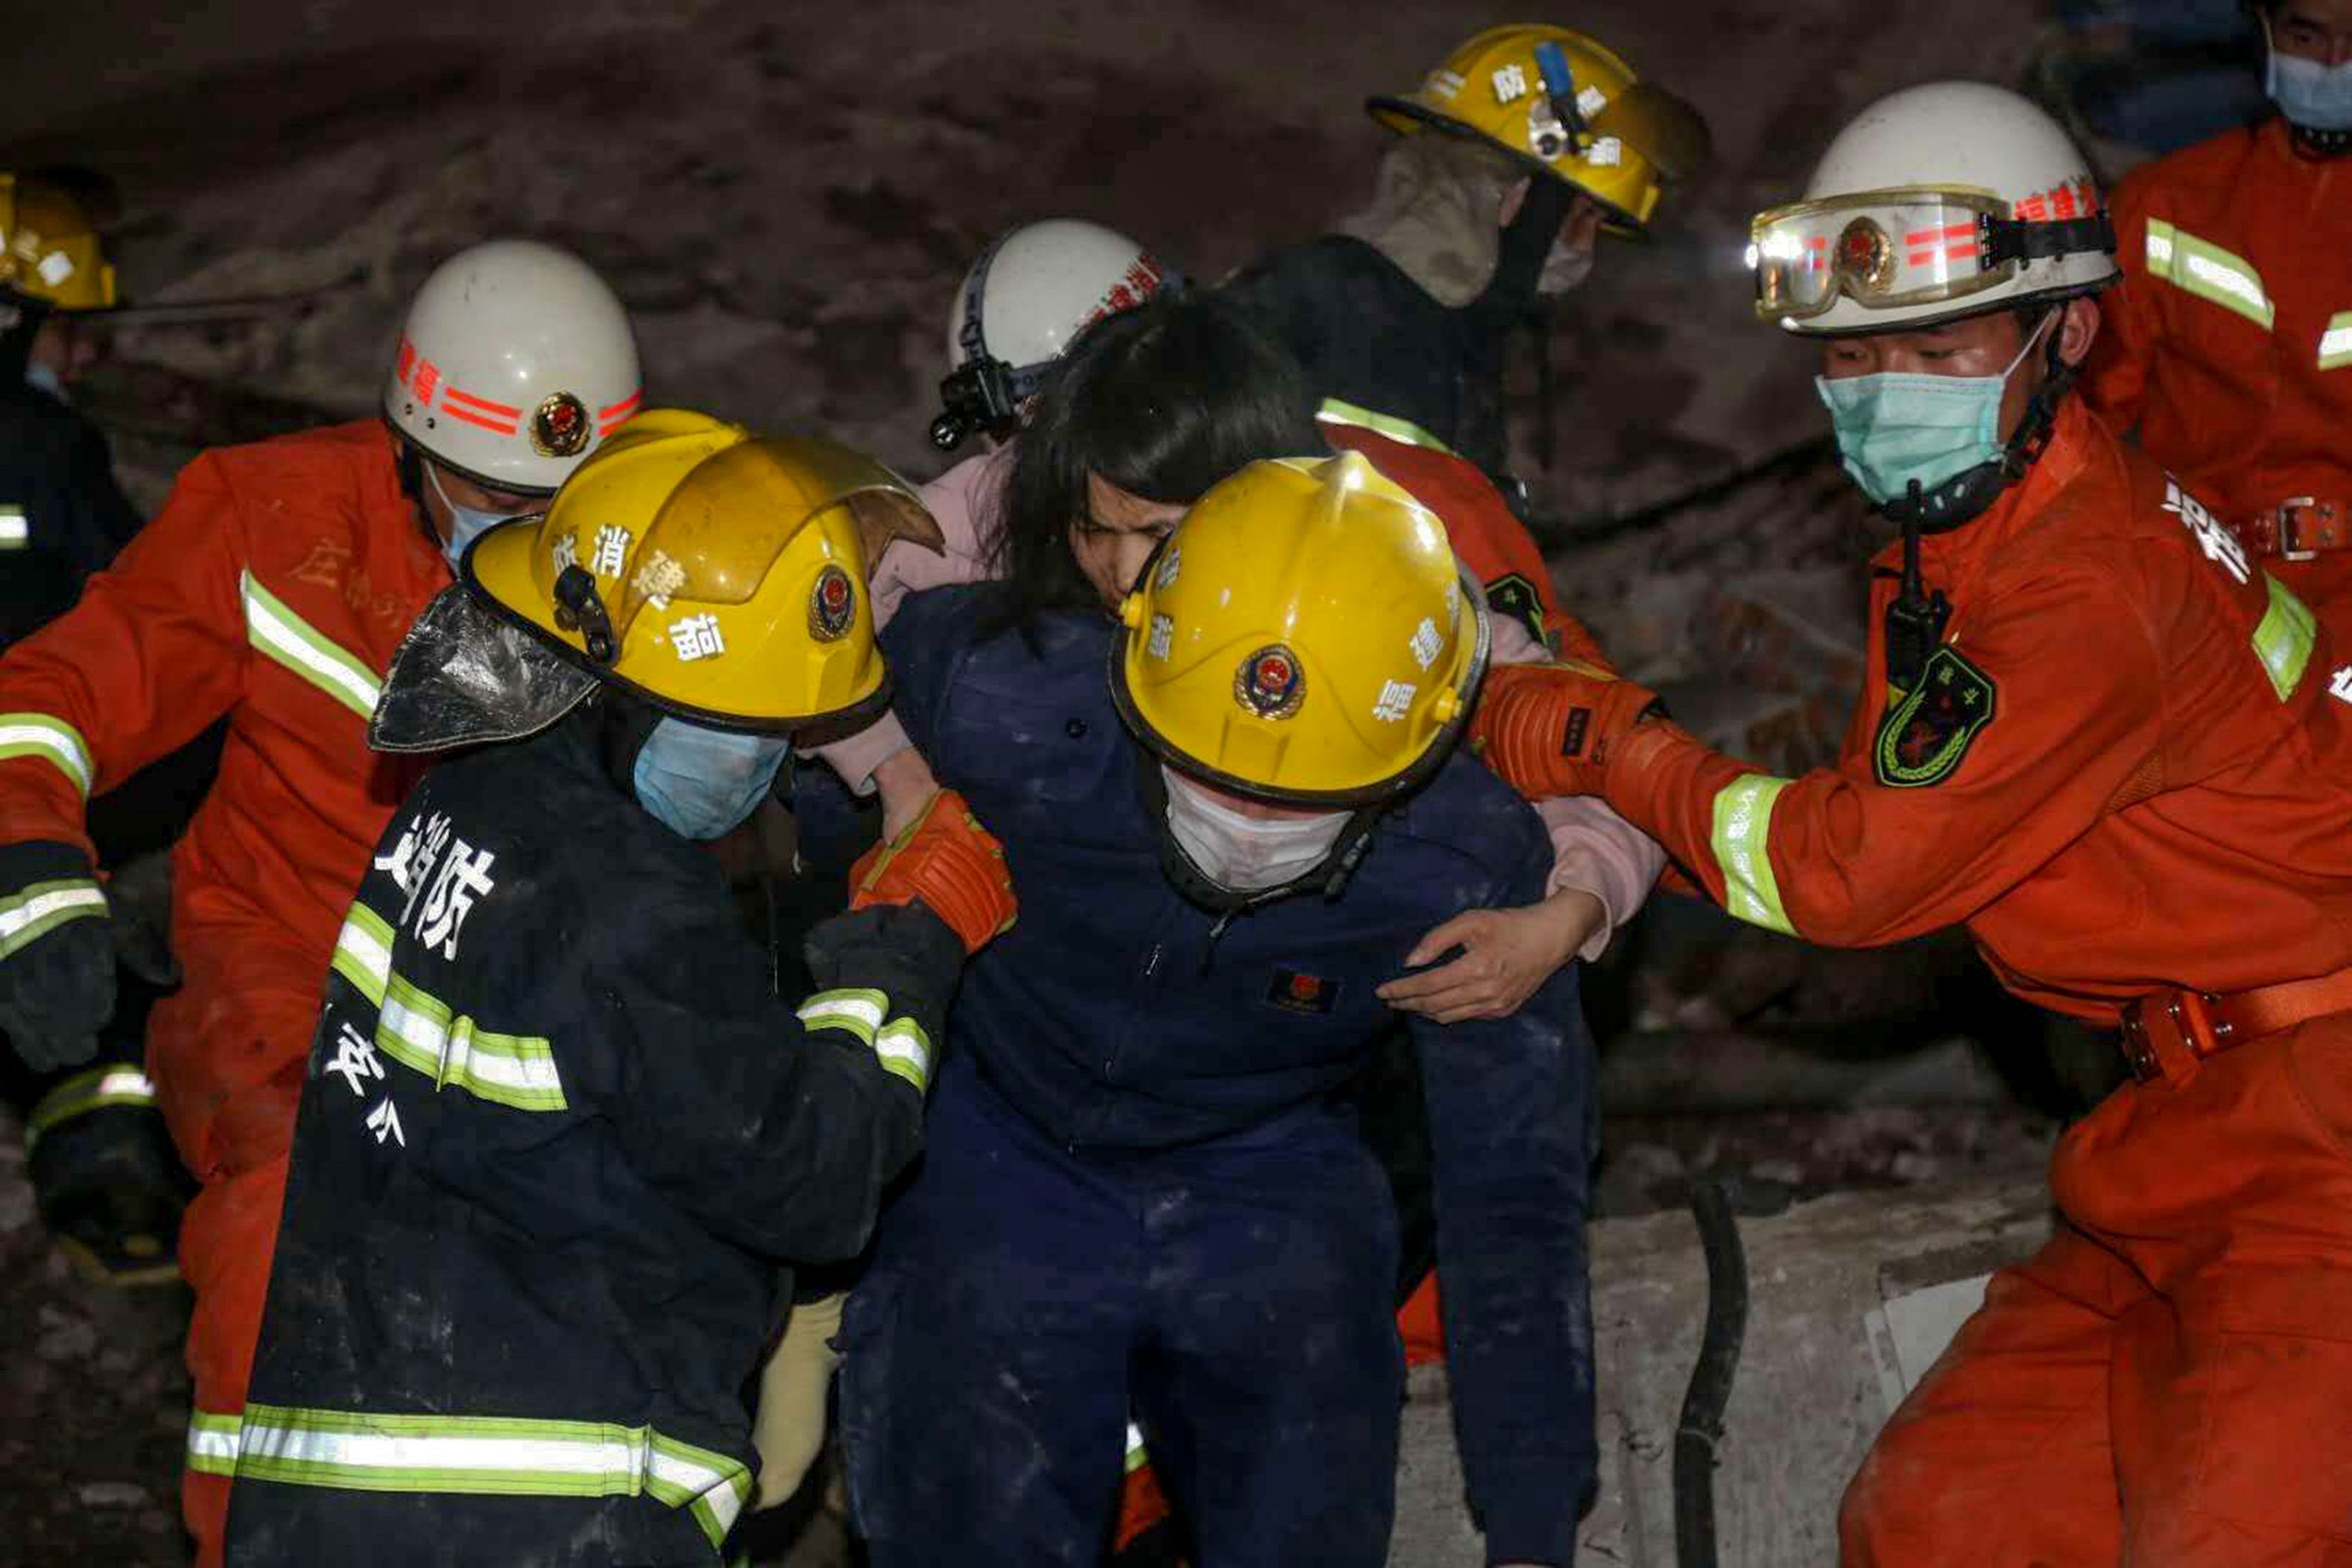 In this image, rescuers help a man walk